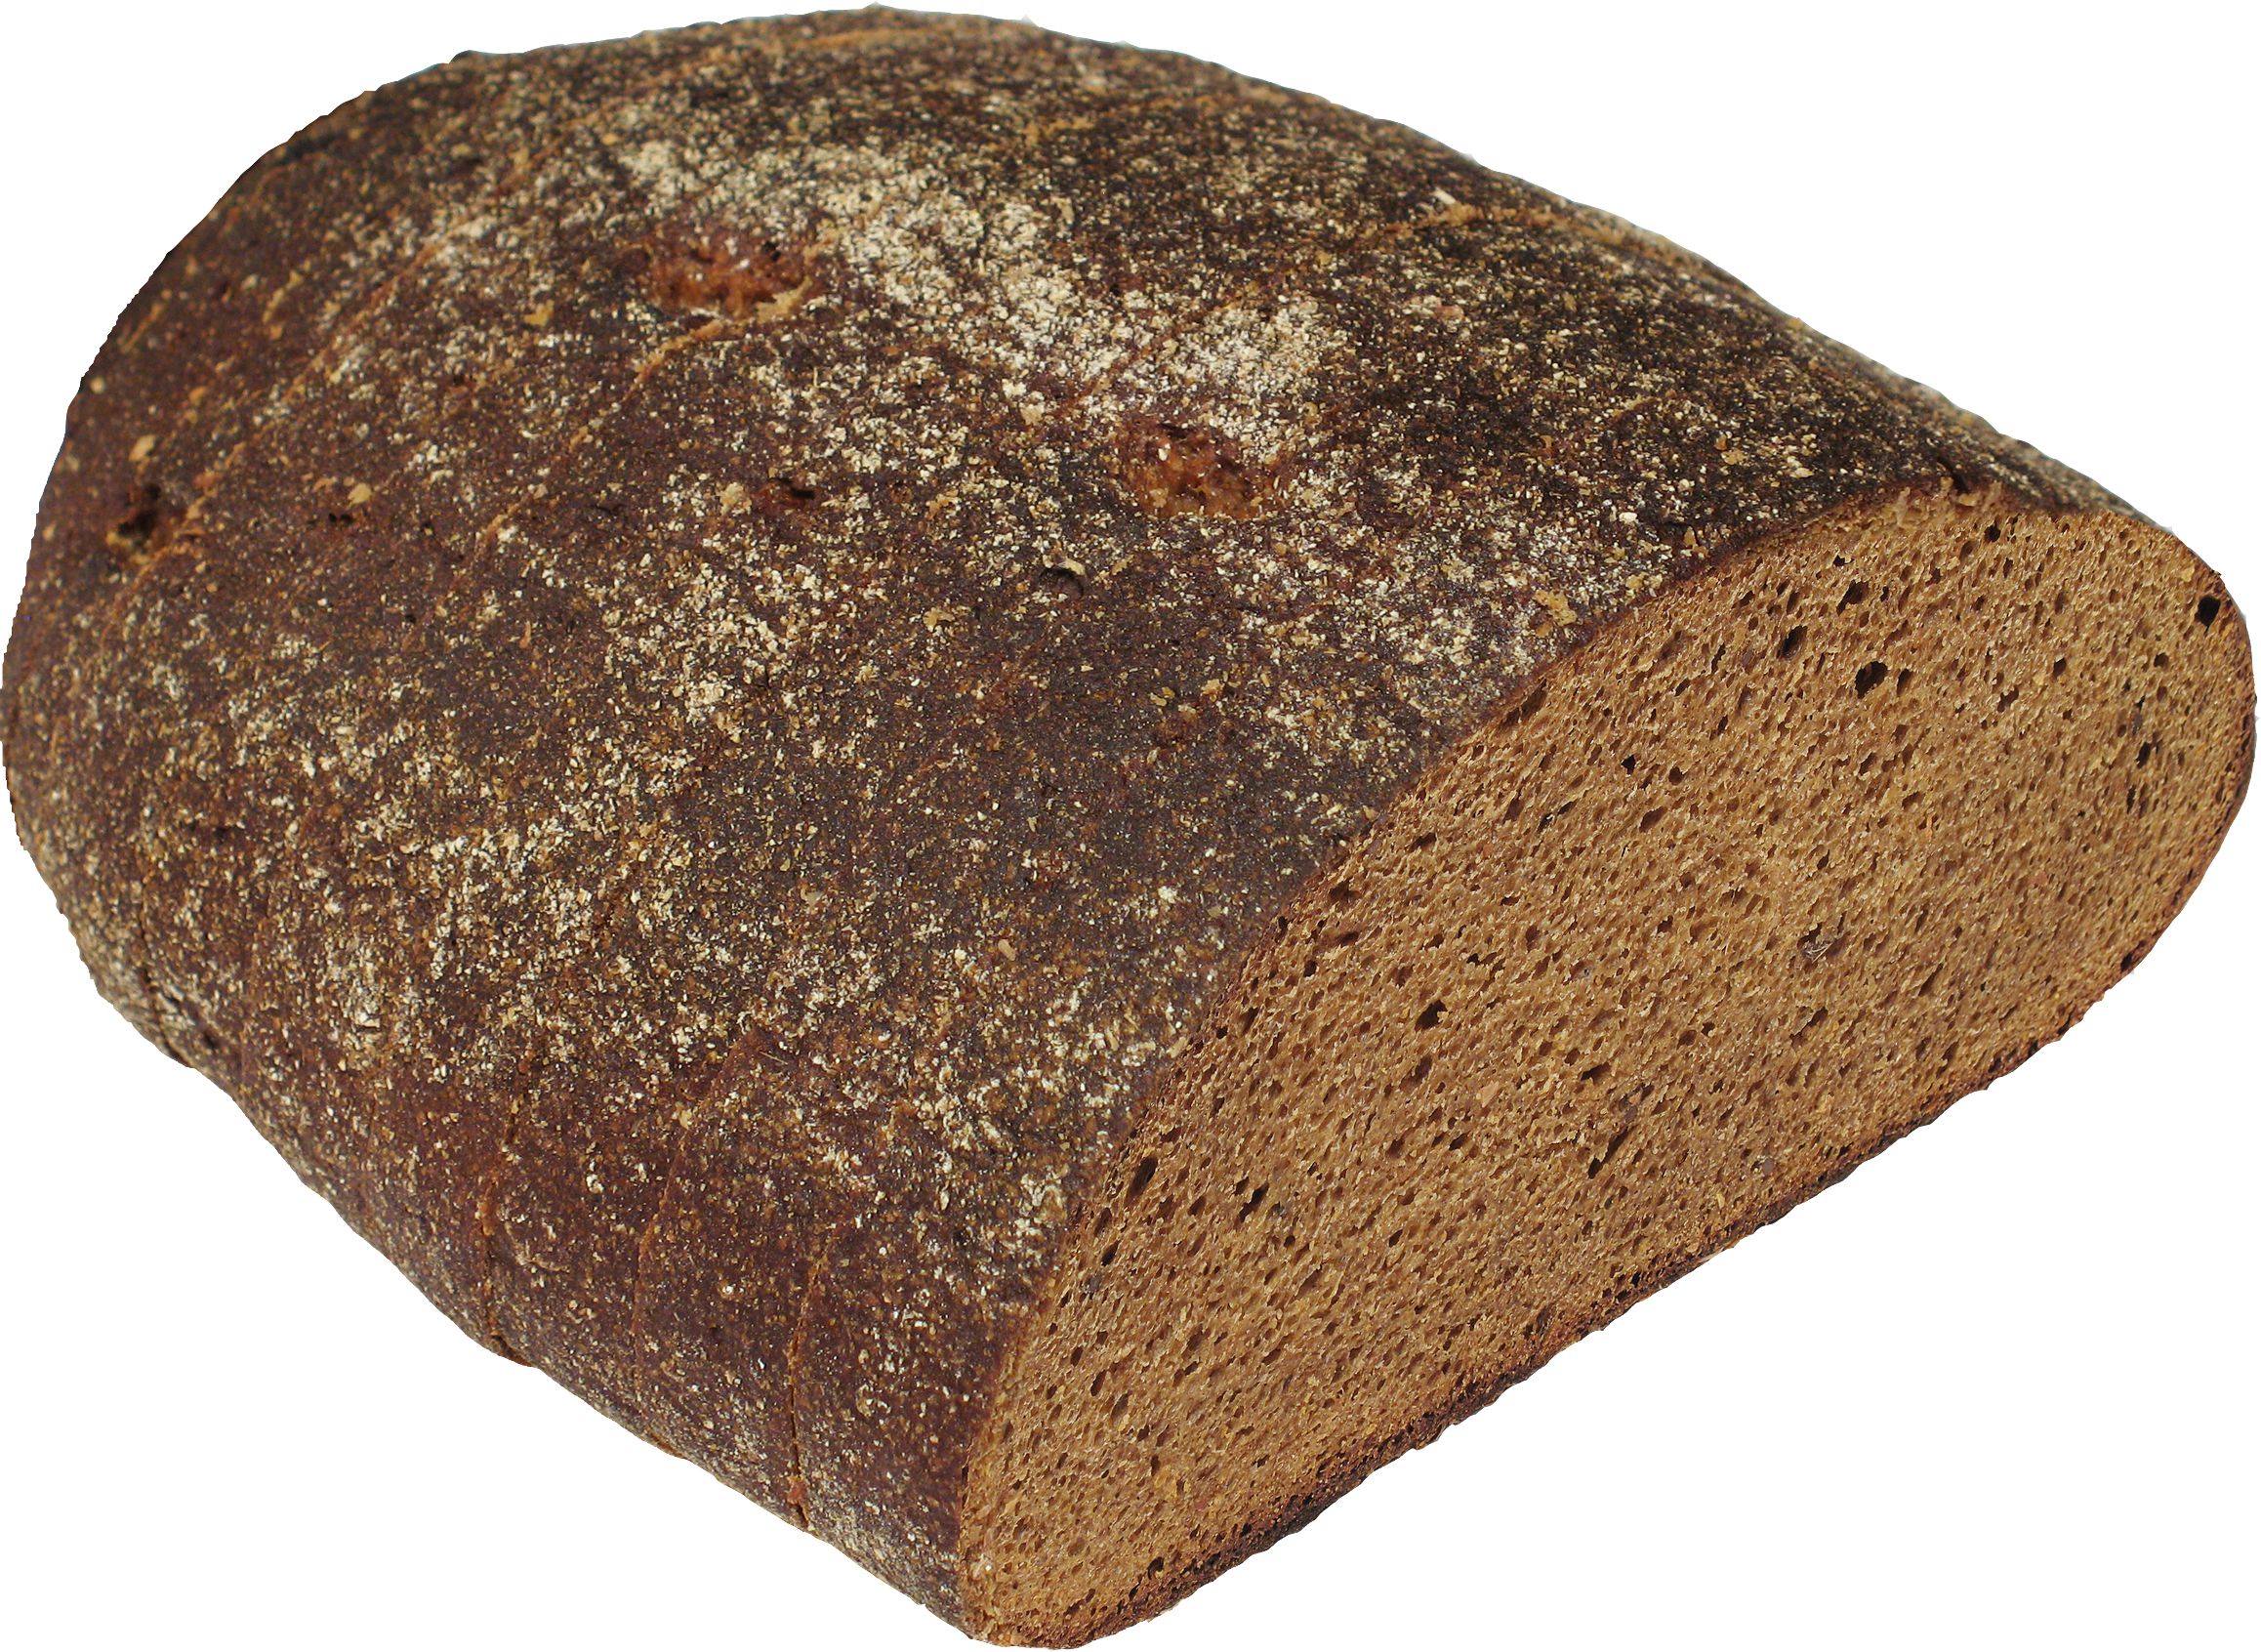 Bread PNG image free download, bun picture PNG.